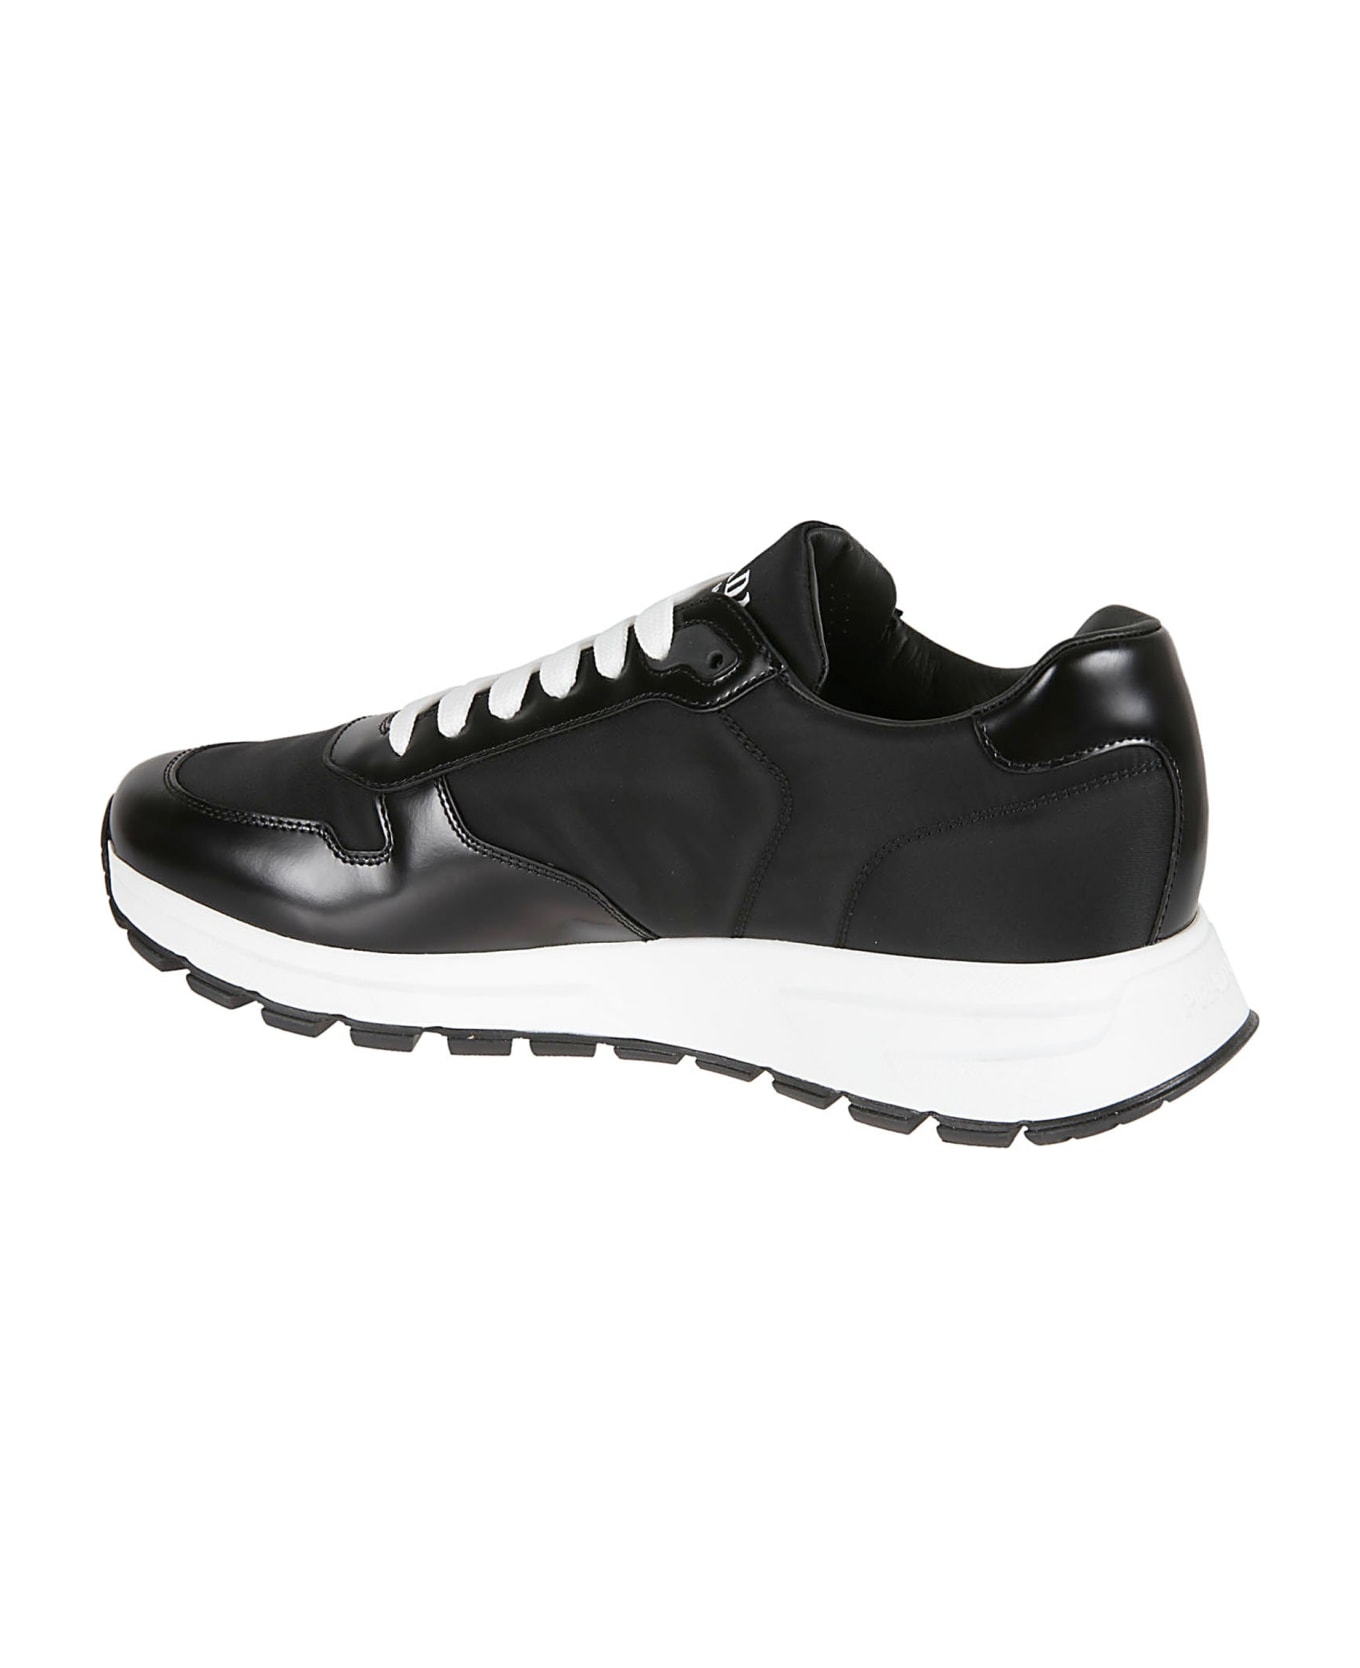 Prada Leather And Fabric Sneakers - Black